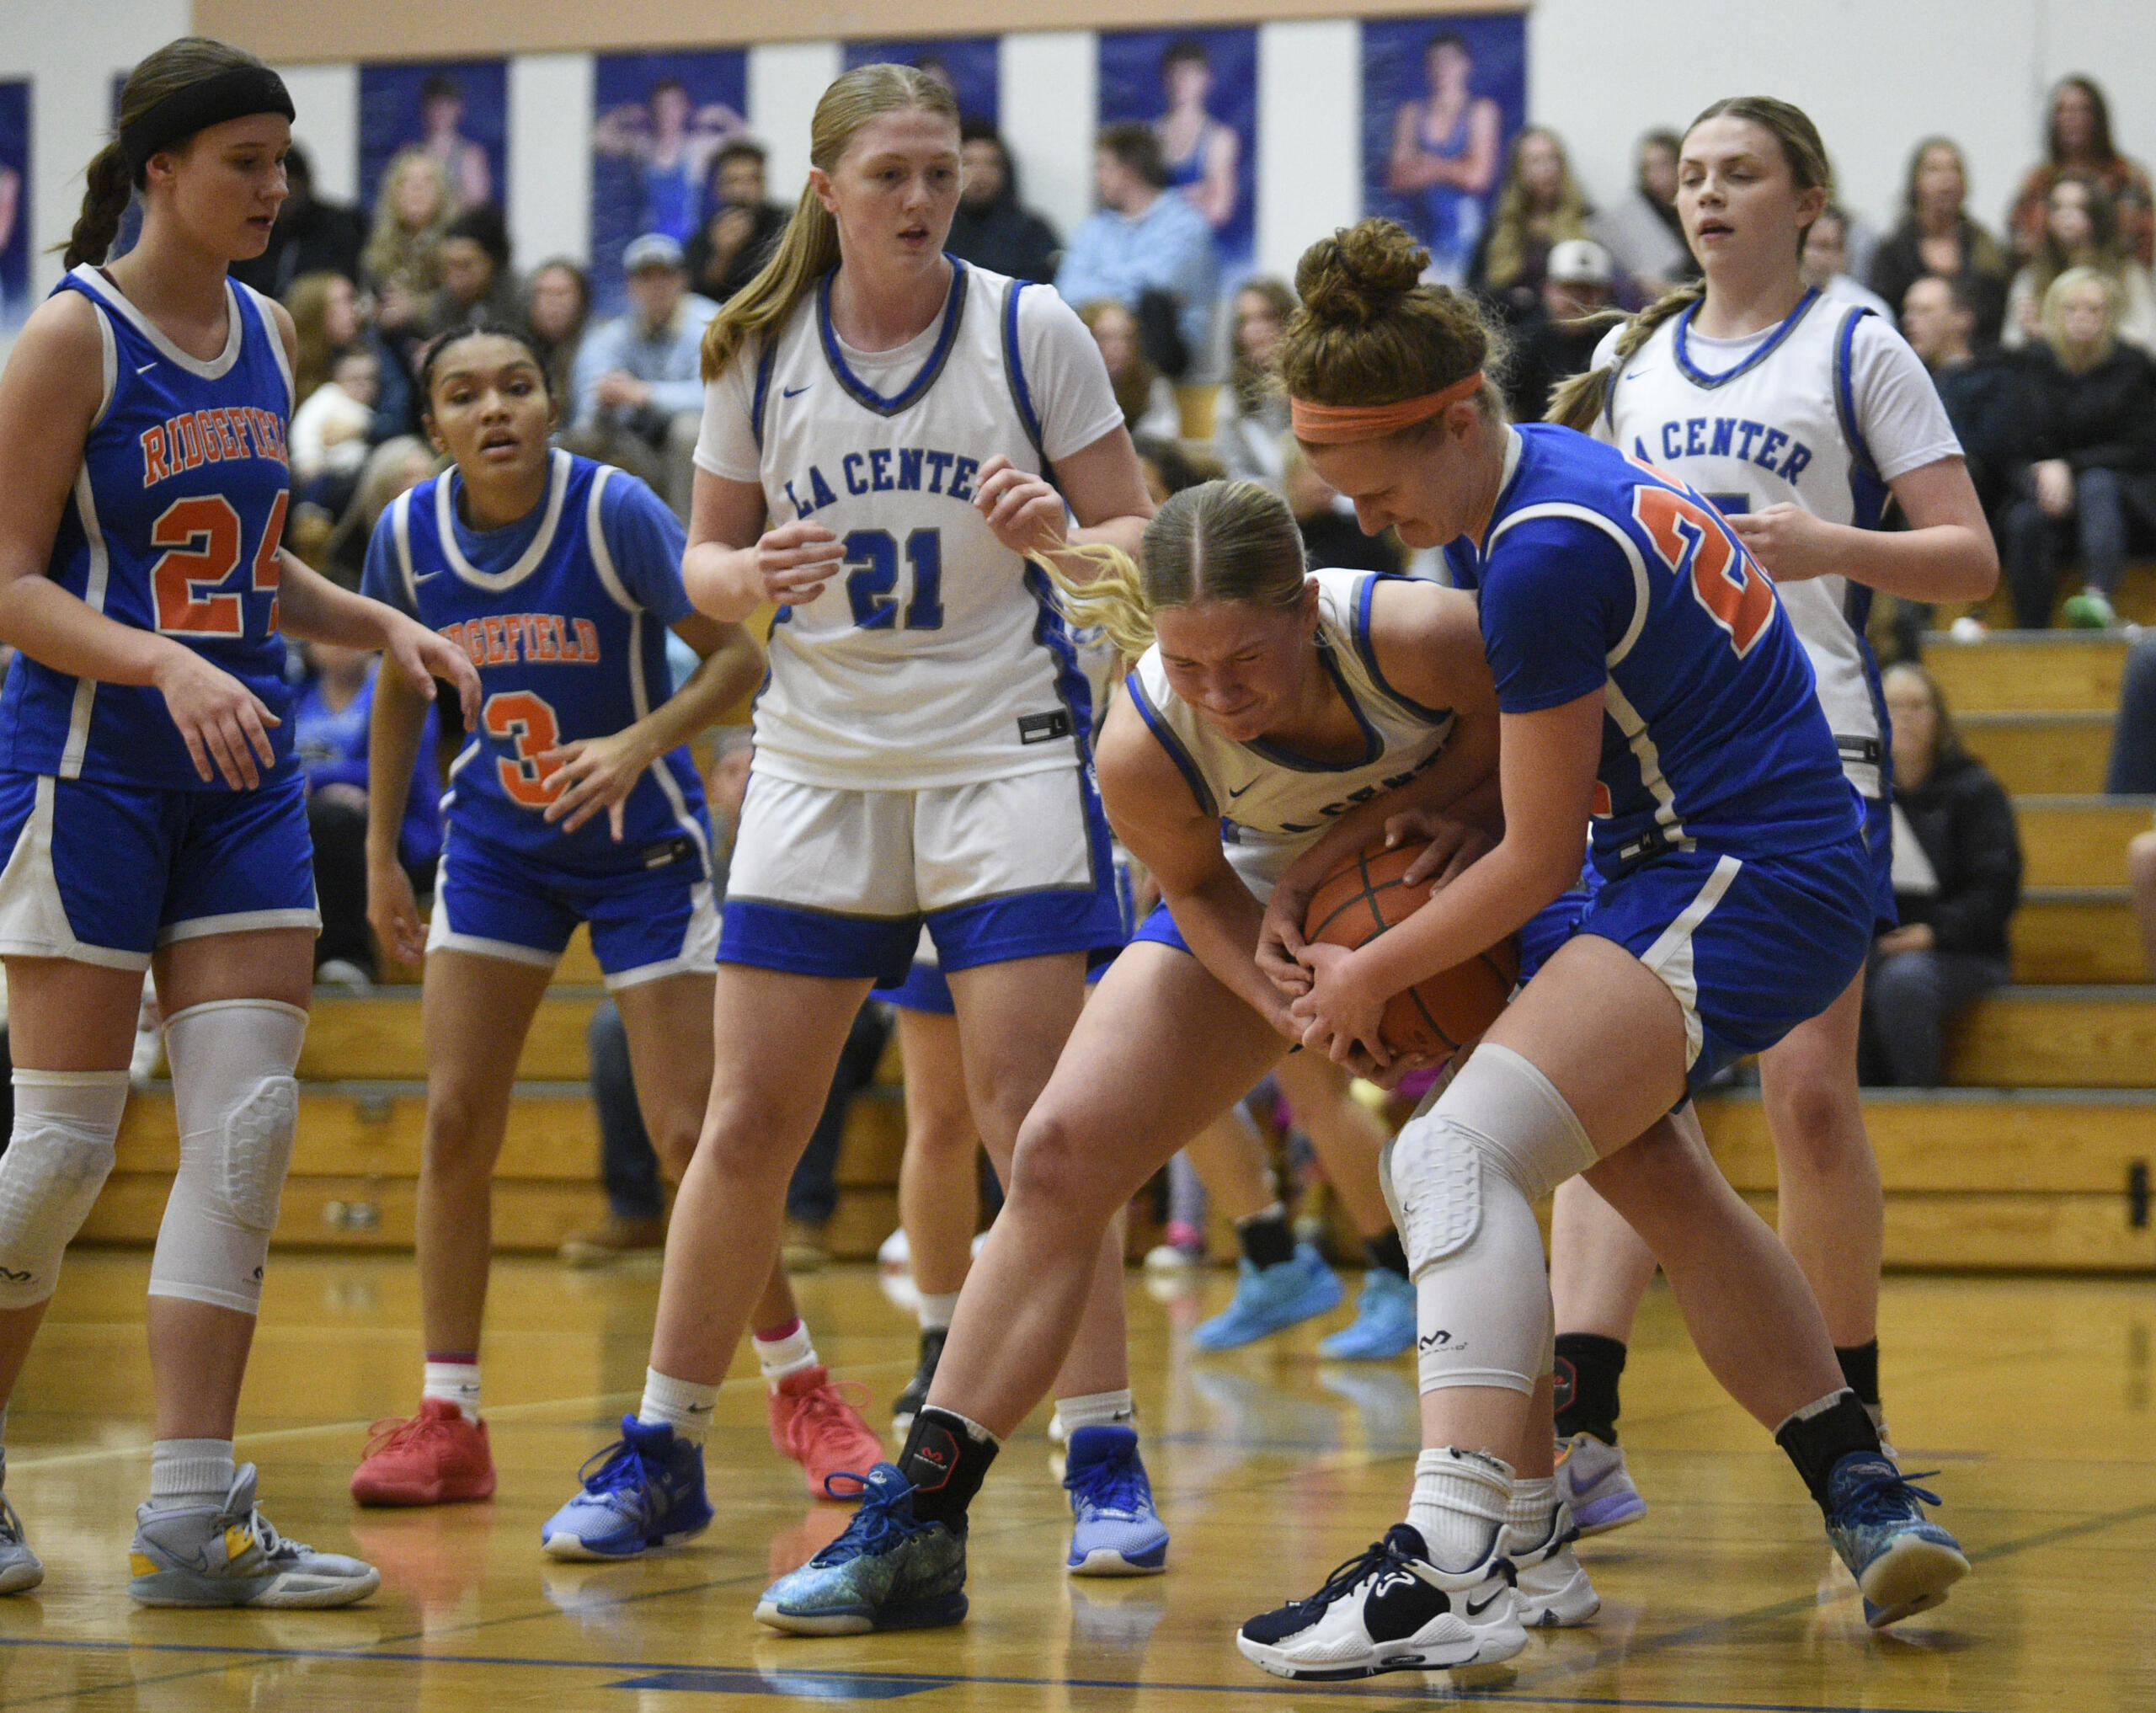 La Center’s Mekenzie Schockelt and Ridgefield’s Elizabeth Swift get tied up for a jump ball call during a non-league girls basketball game on Monday, Dec. 18, 2023, at La Center High School.